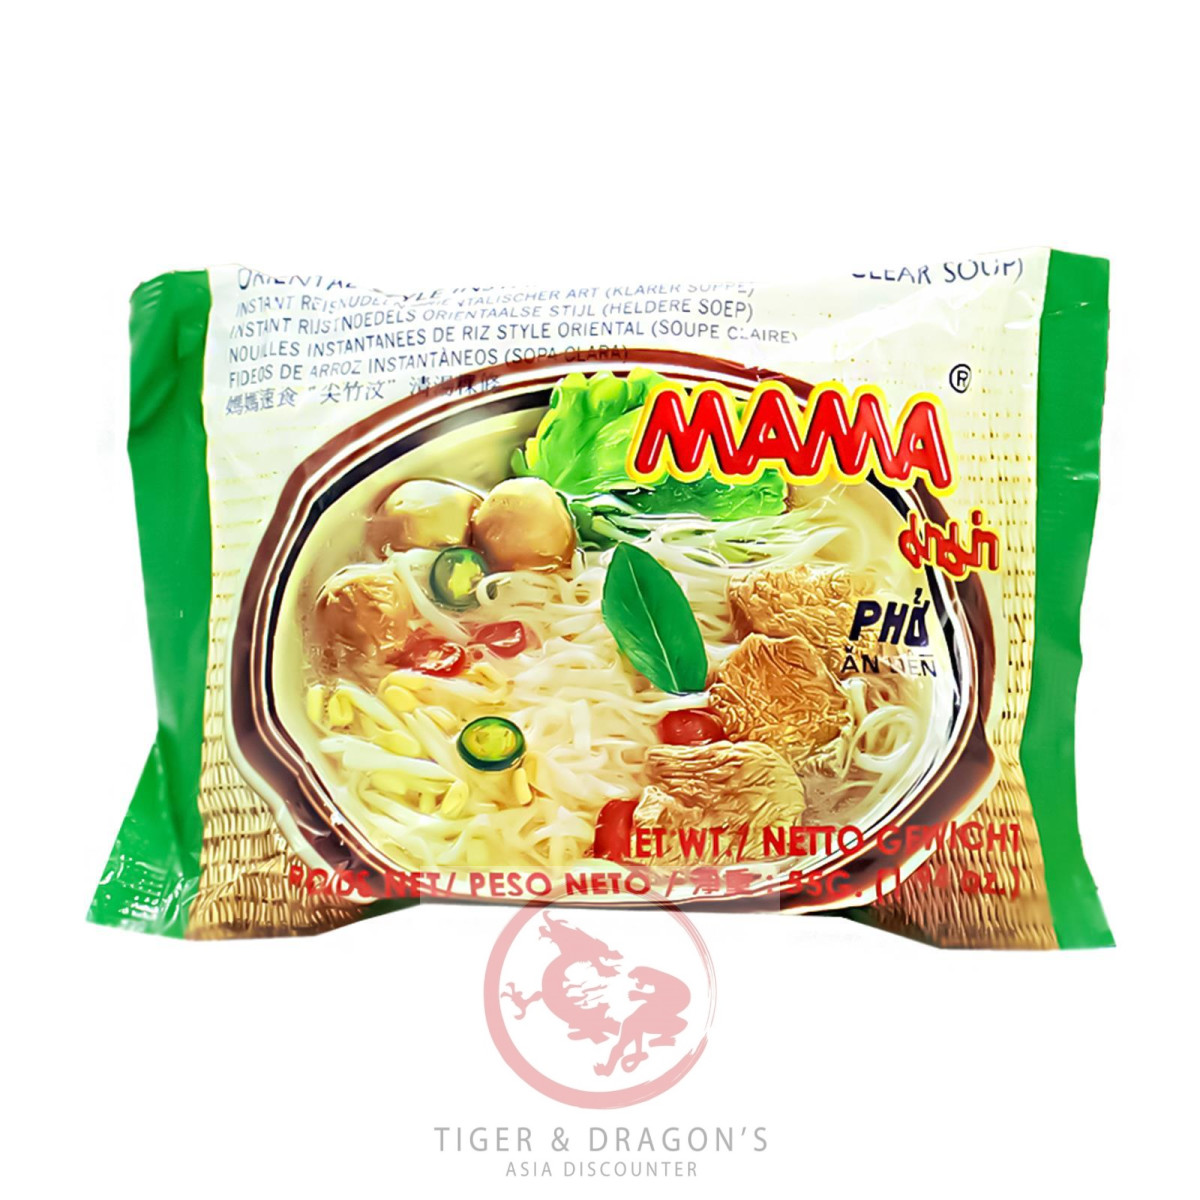 Mama Reisnudeln Chand Instant Pho Suppe 55g